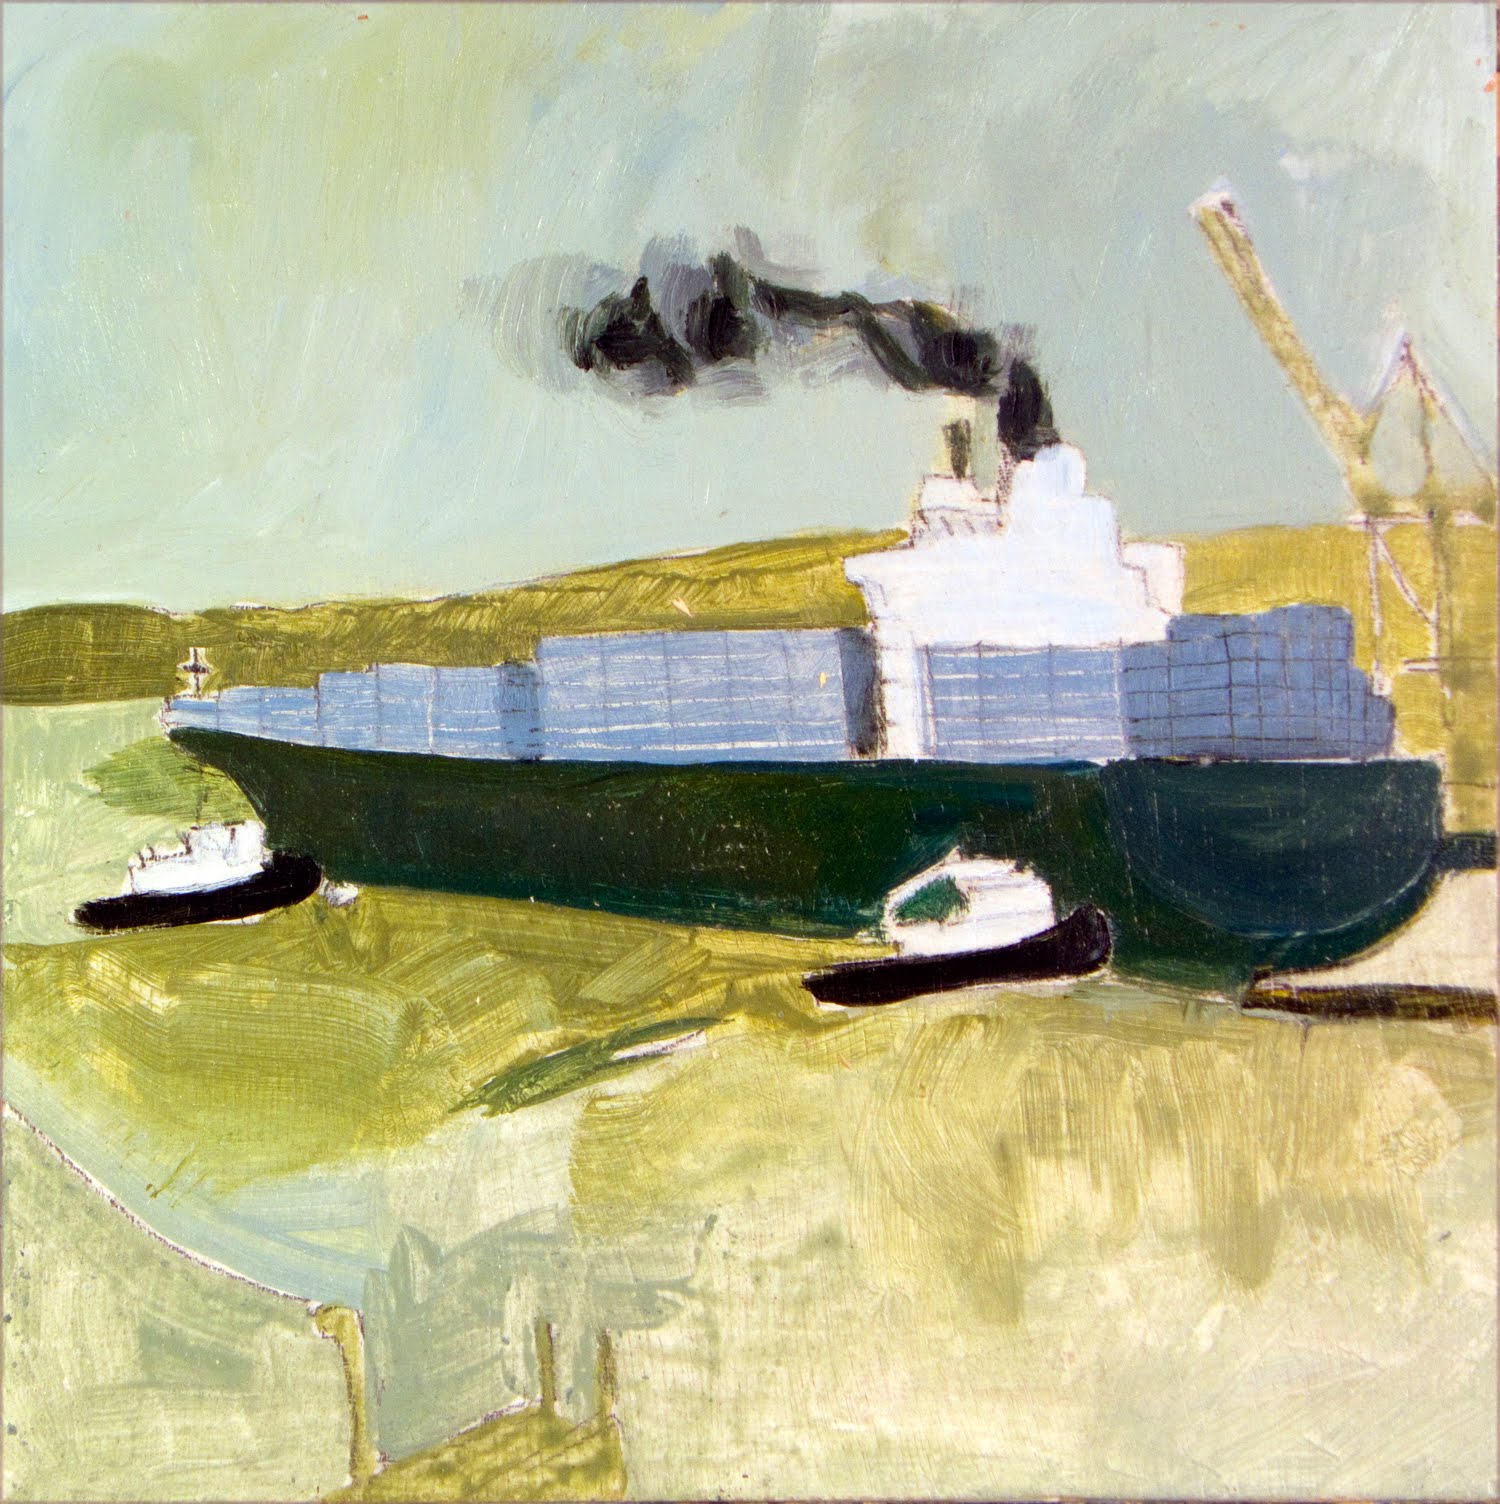 Brian Sloan, artist, painting, art, acrylic paint, Container Ship